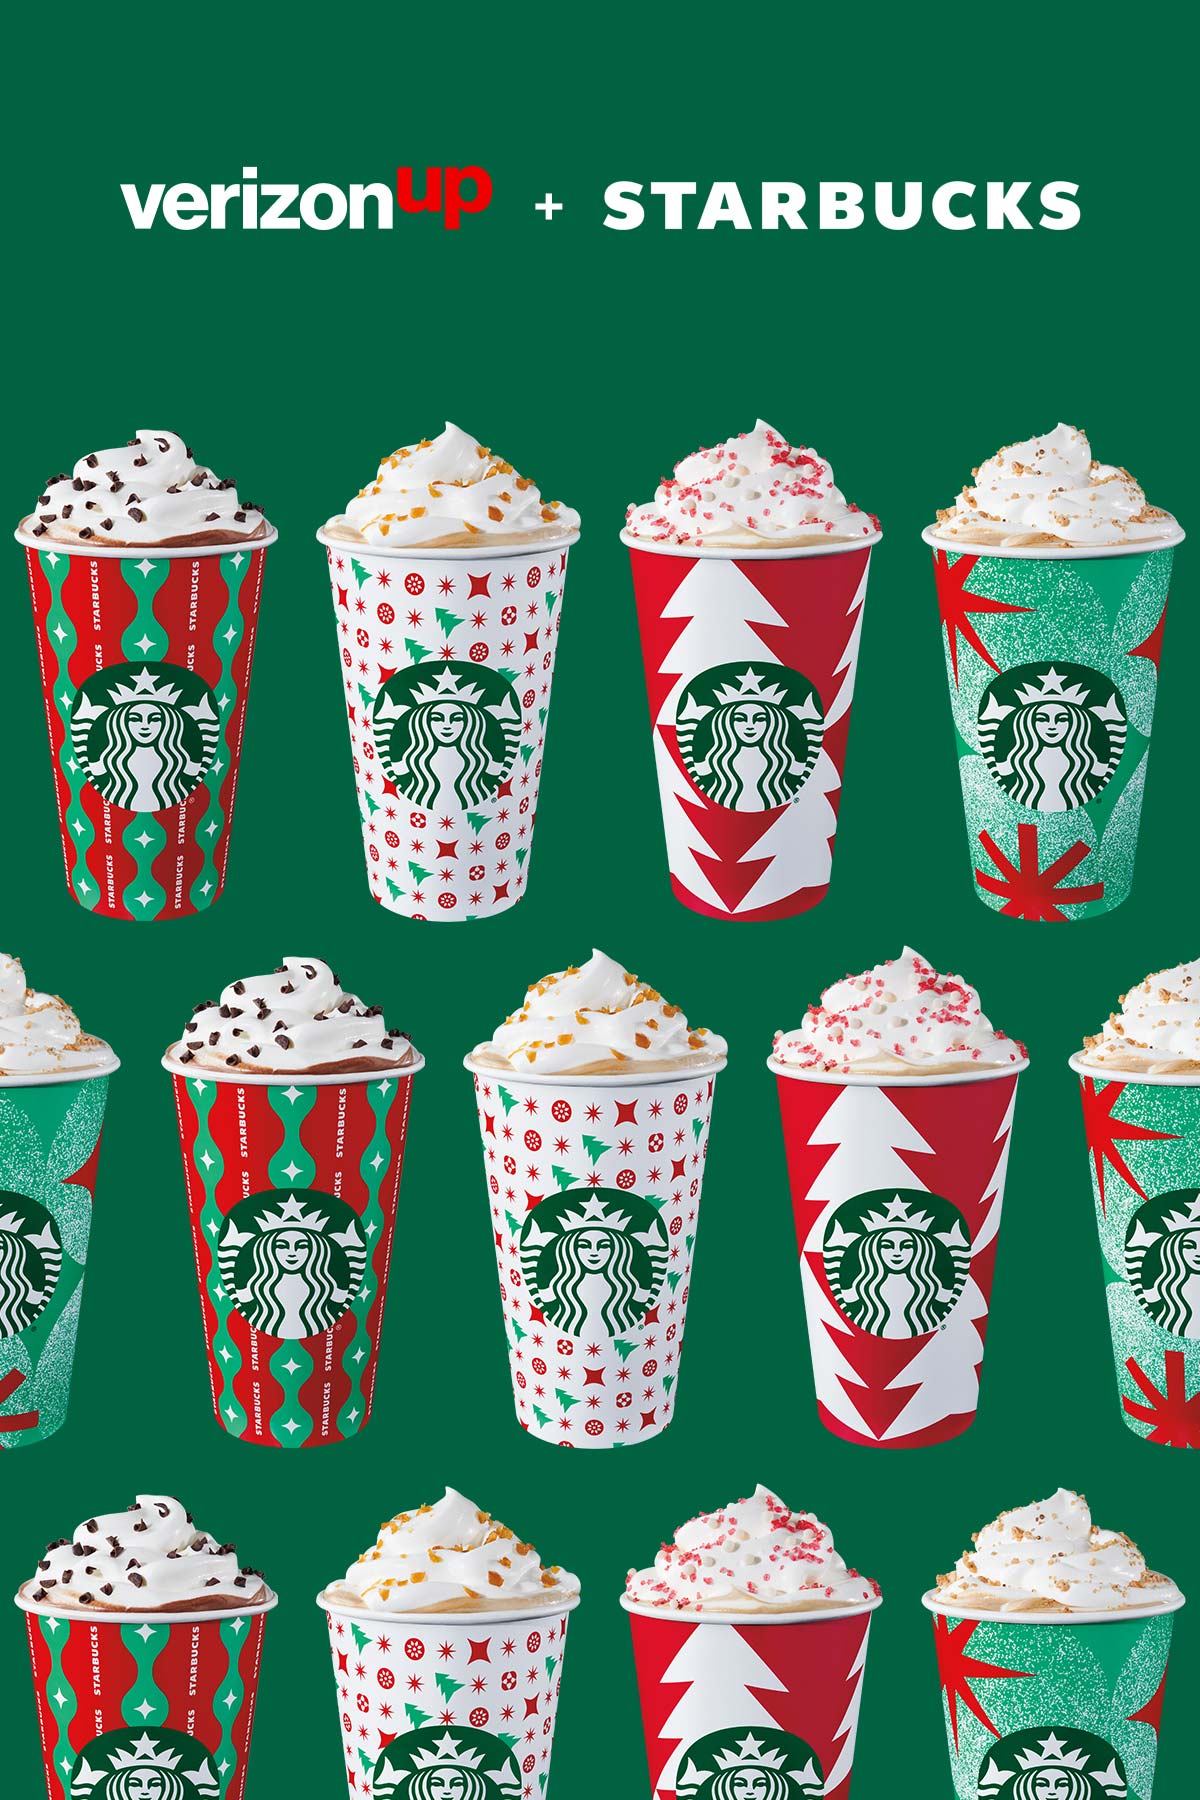 Starbucks and Verizon Up logos on green background with Starbucks holiday drink images.